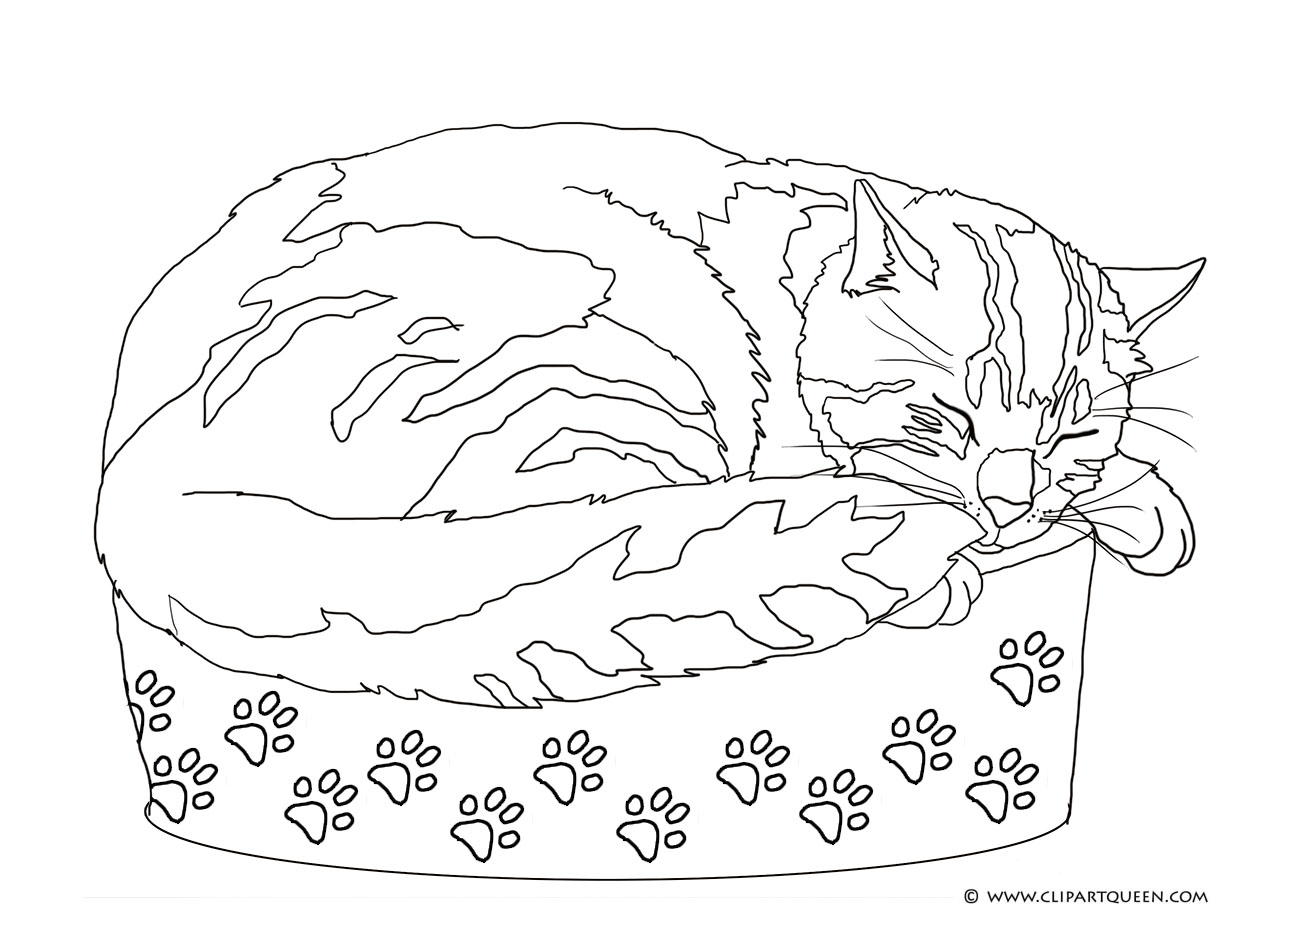 coloring page with sleeping cat